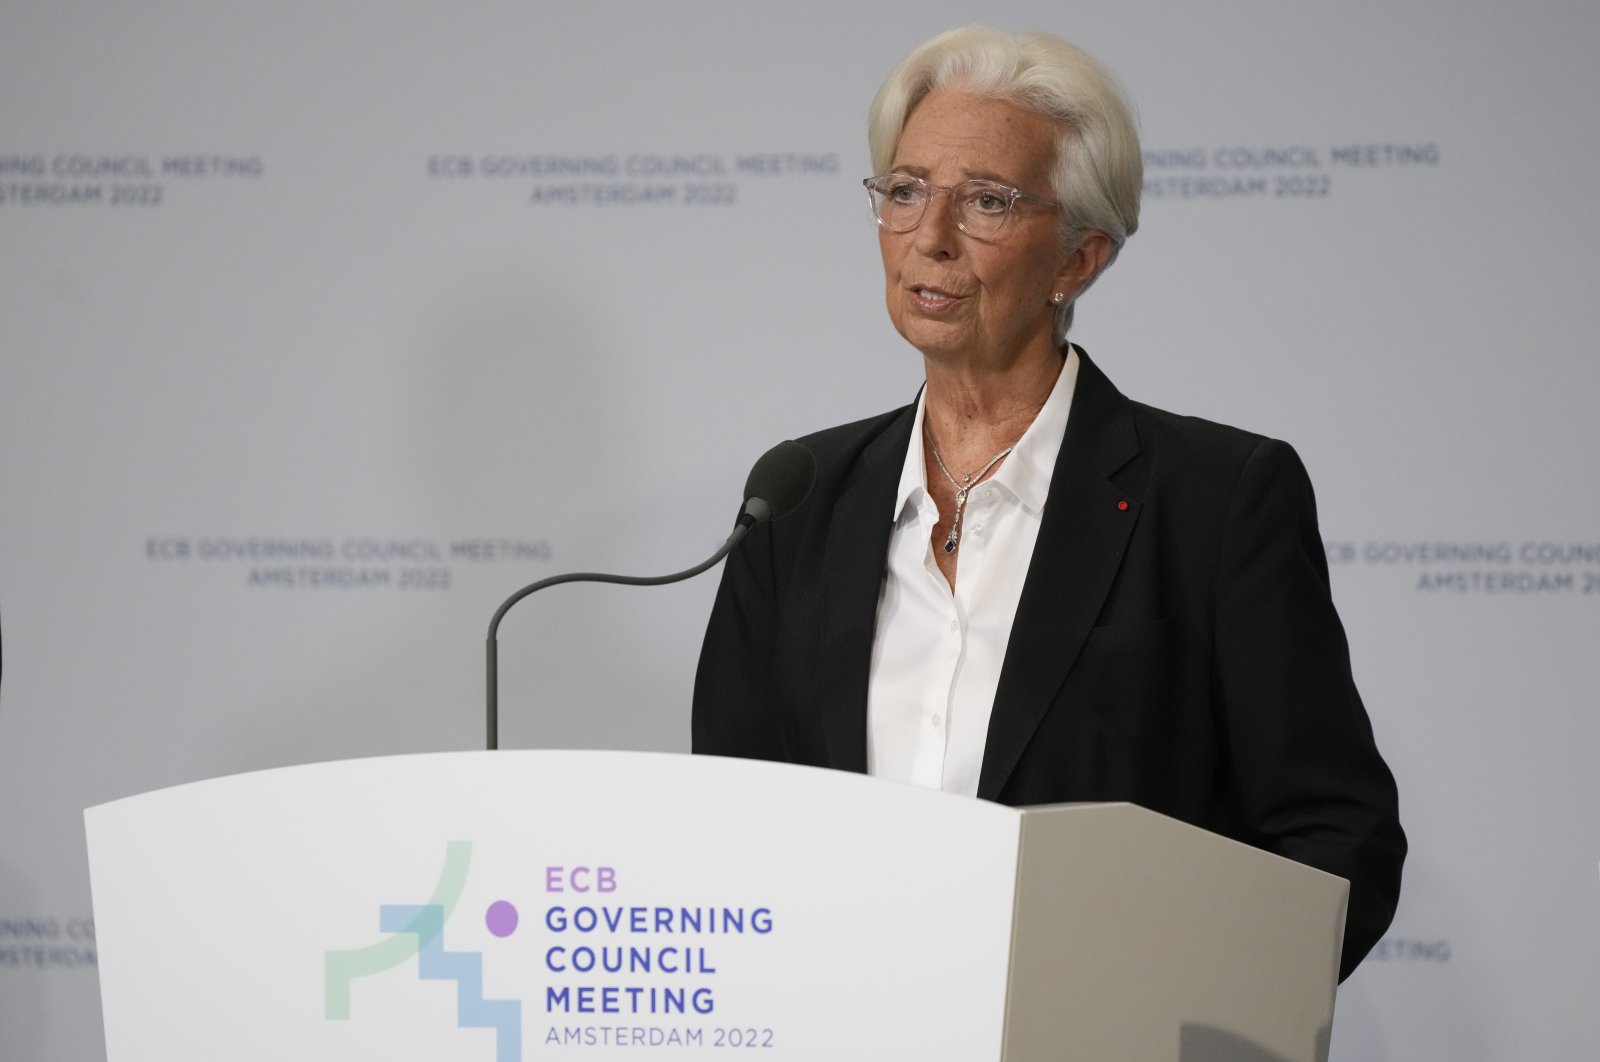 European Central Bank President Christine Lagarde speaks during a press conference in Amsterdam, Netherlands, June 9, 2022. (AP Photo)